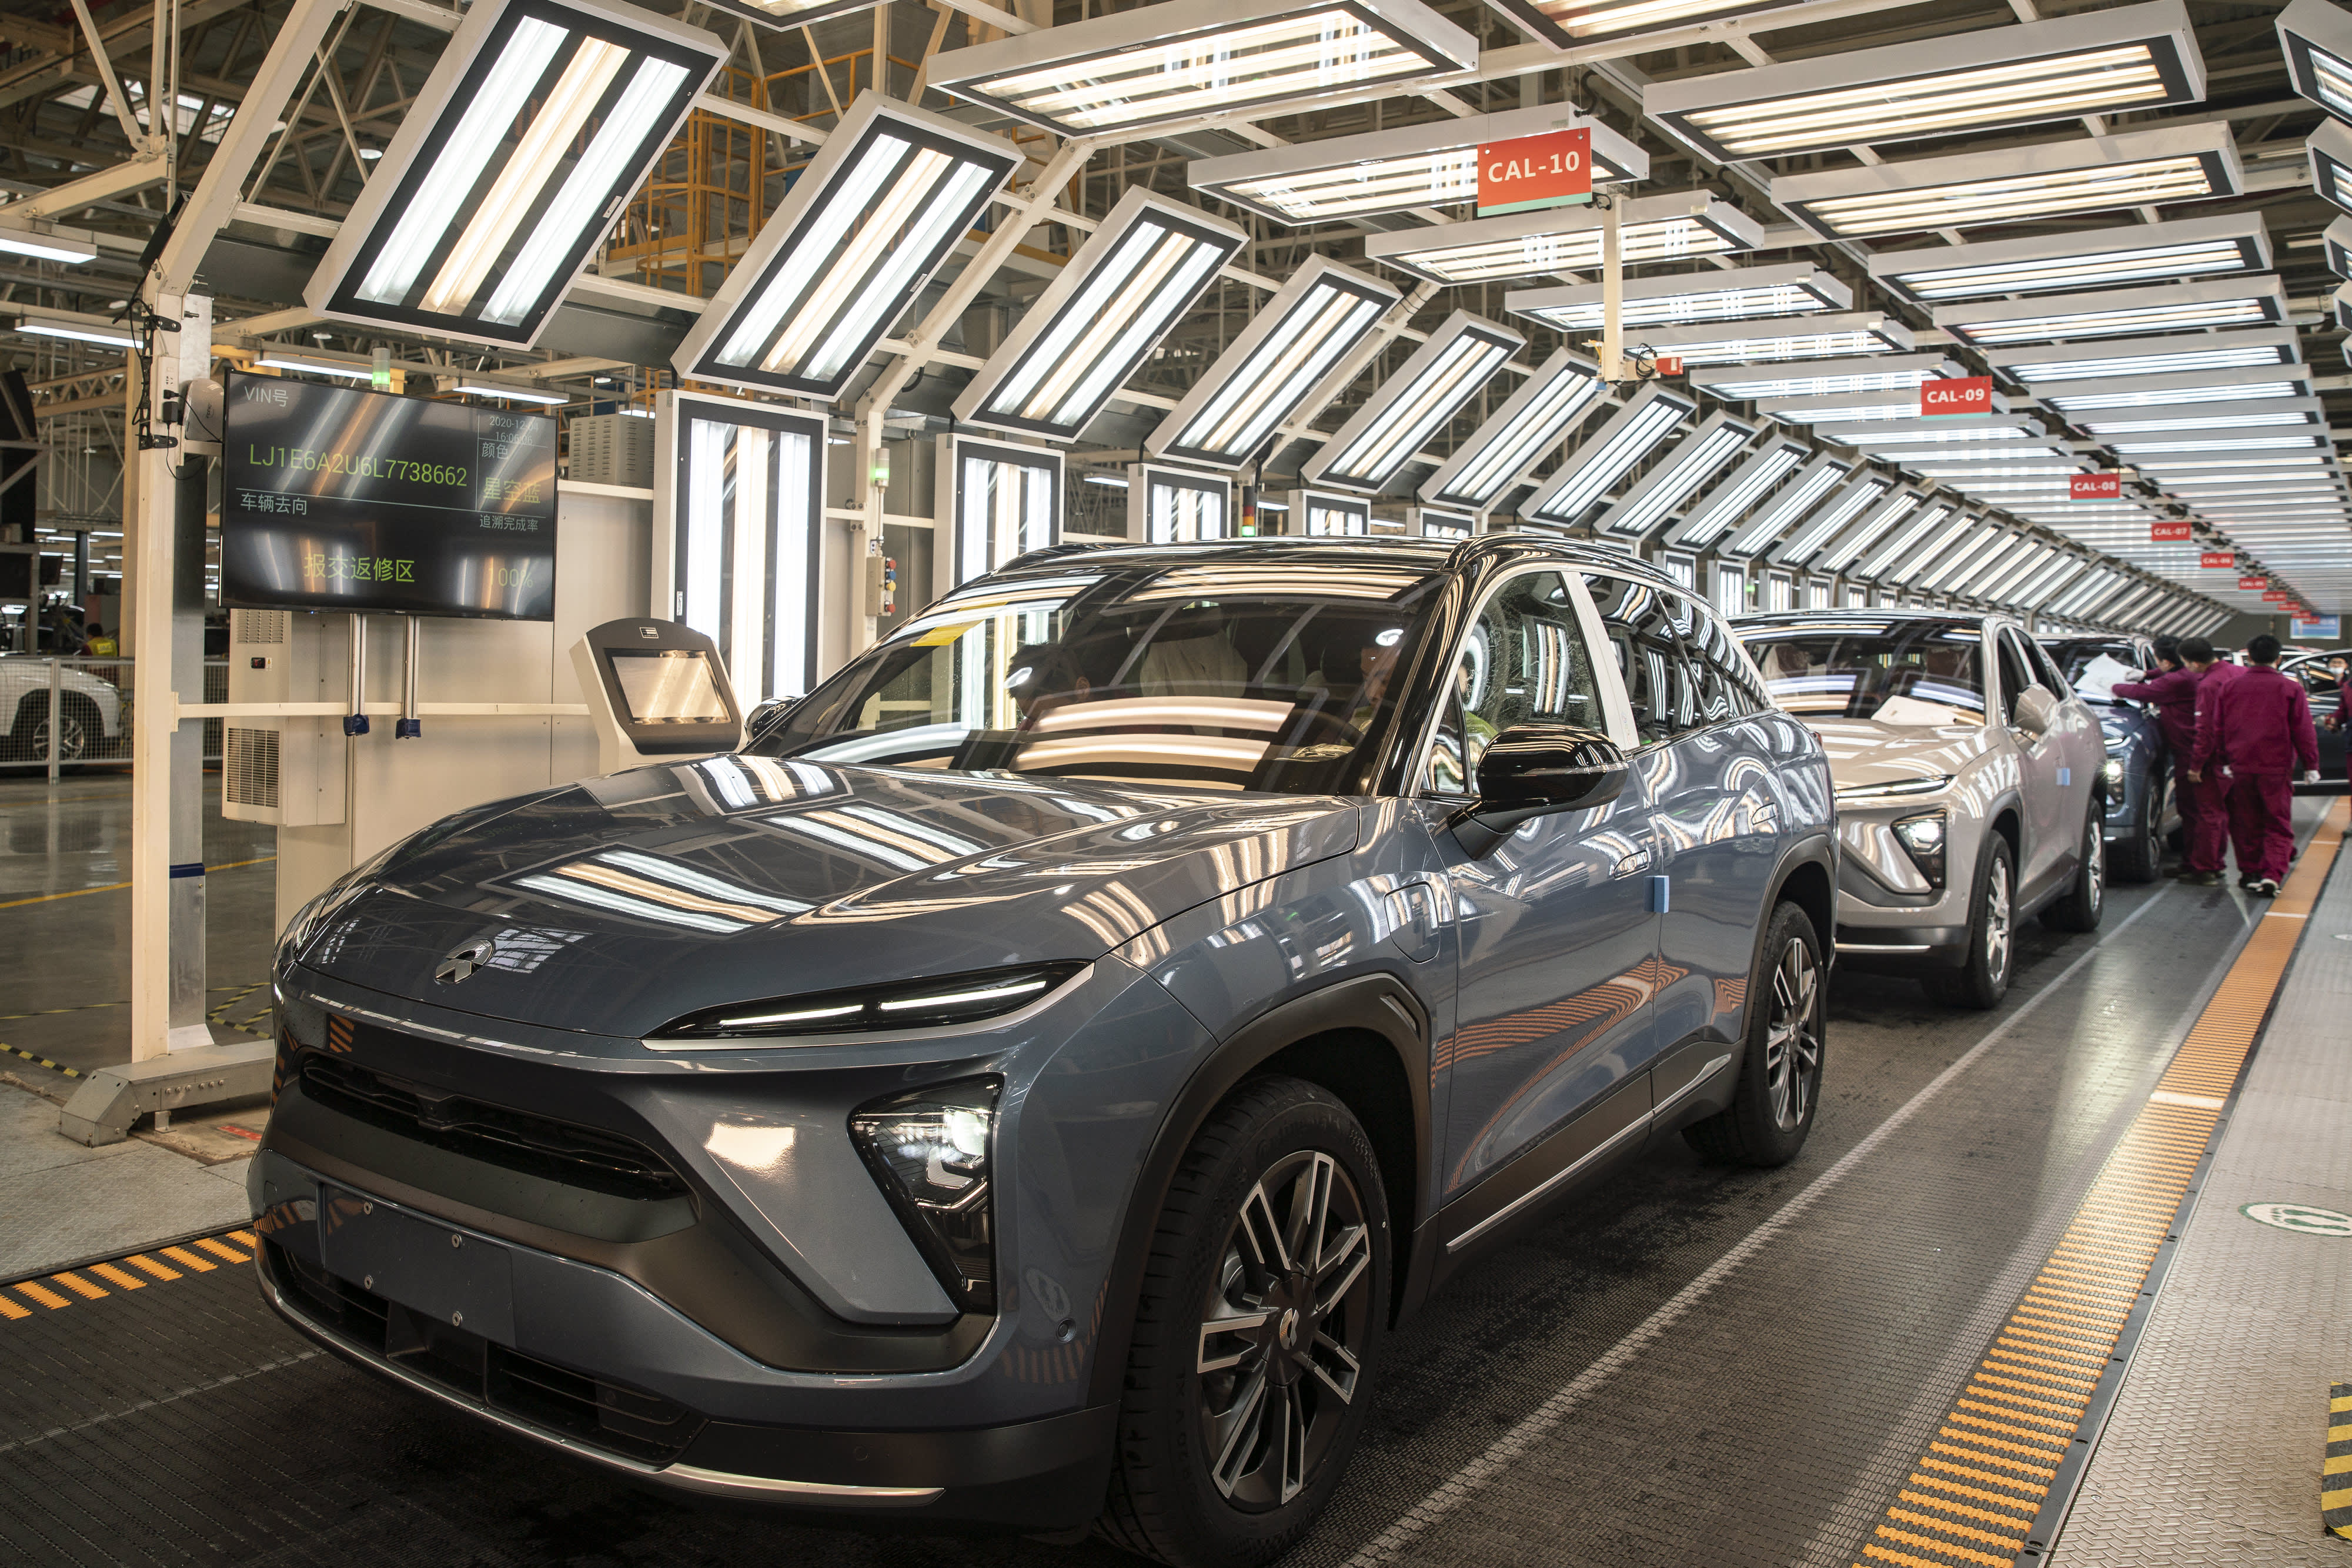 Chinese Electric Car Start Up Nio Doubles Deliveries As Tesla Competition Rises